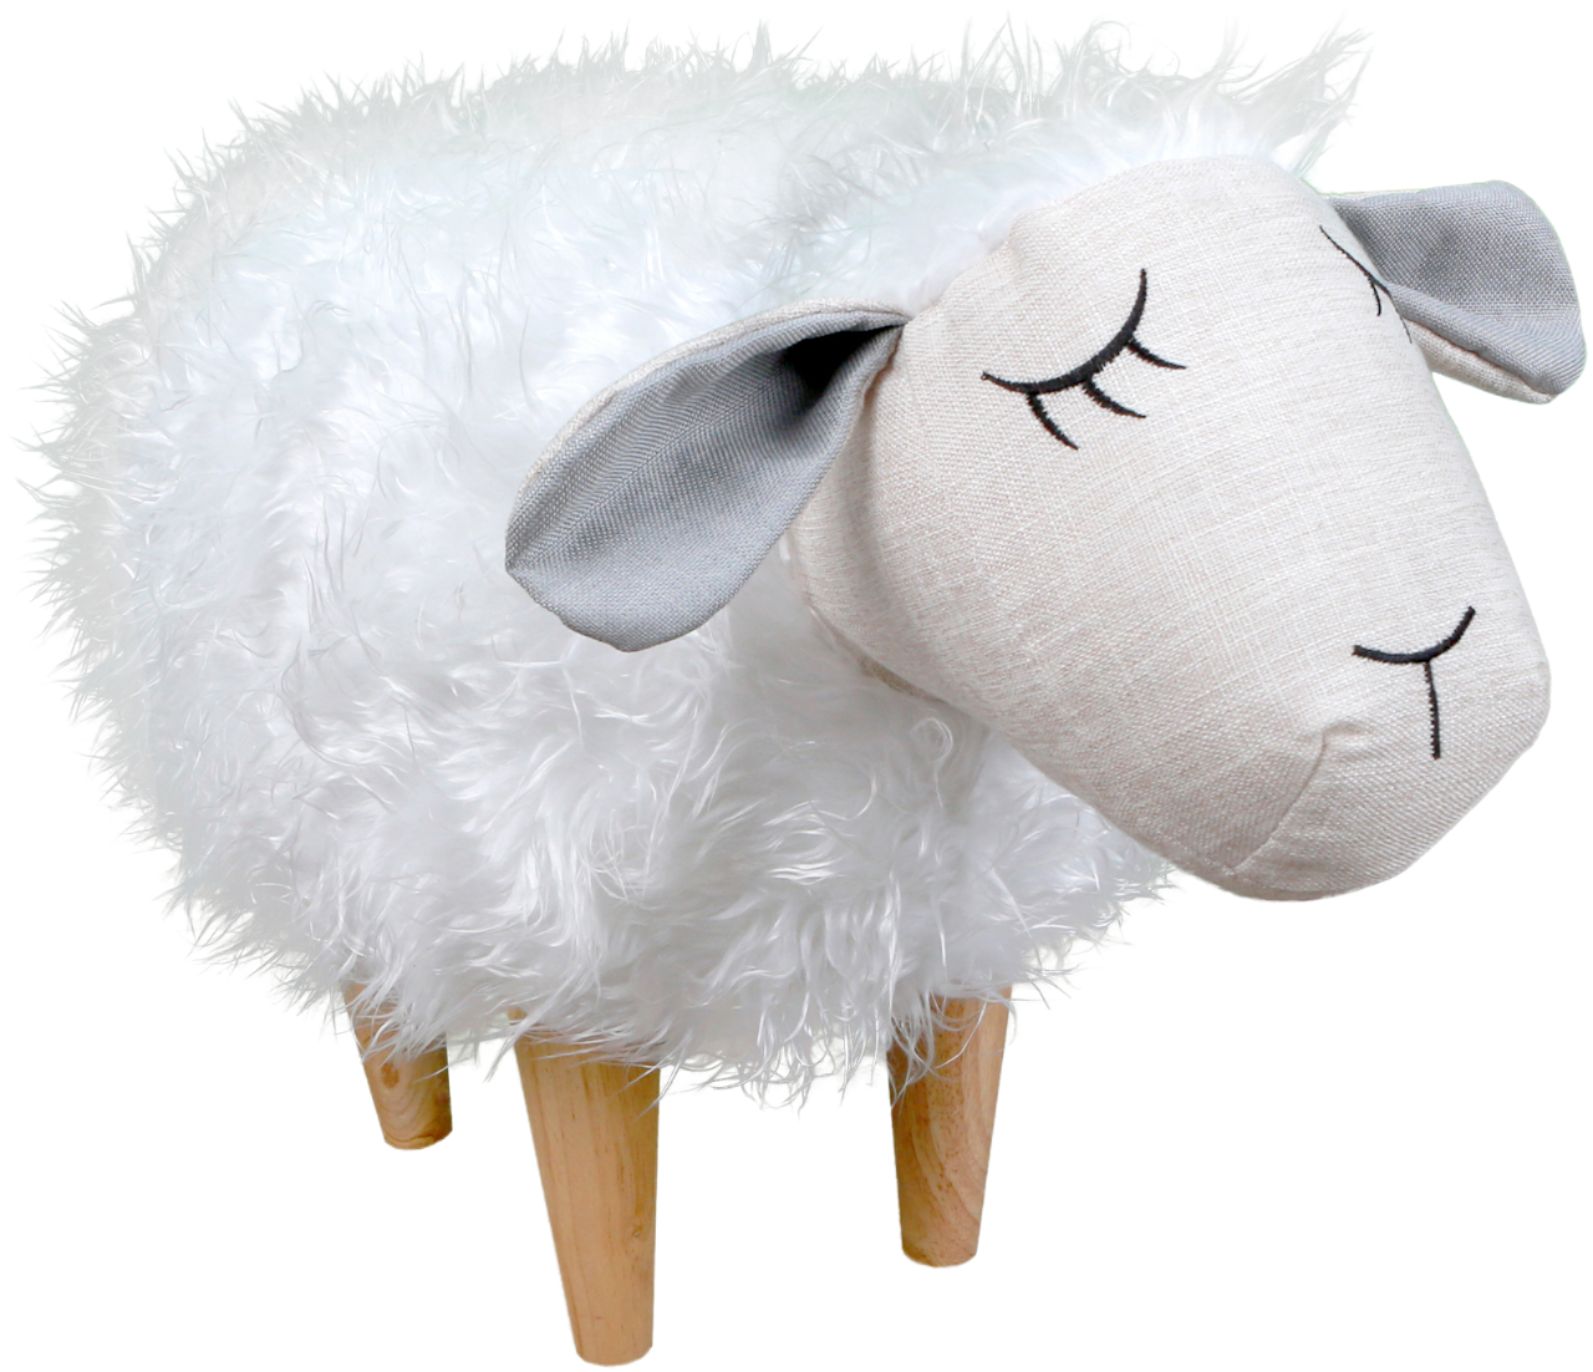 Zoom in on Angle Zoom. Karla Dubois - Sheepy the Sheep Kids Stool - Off-White.